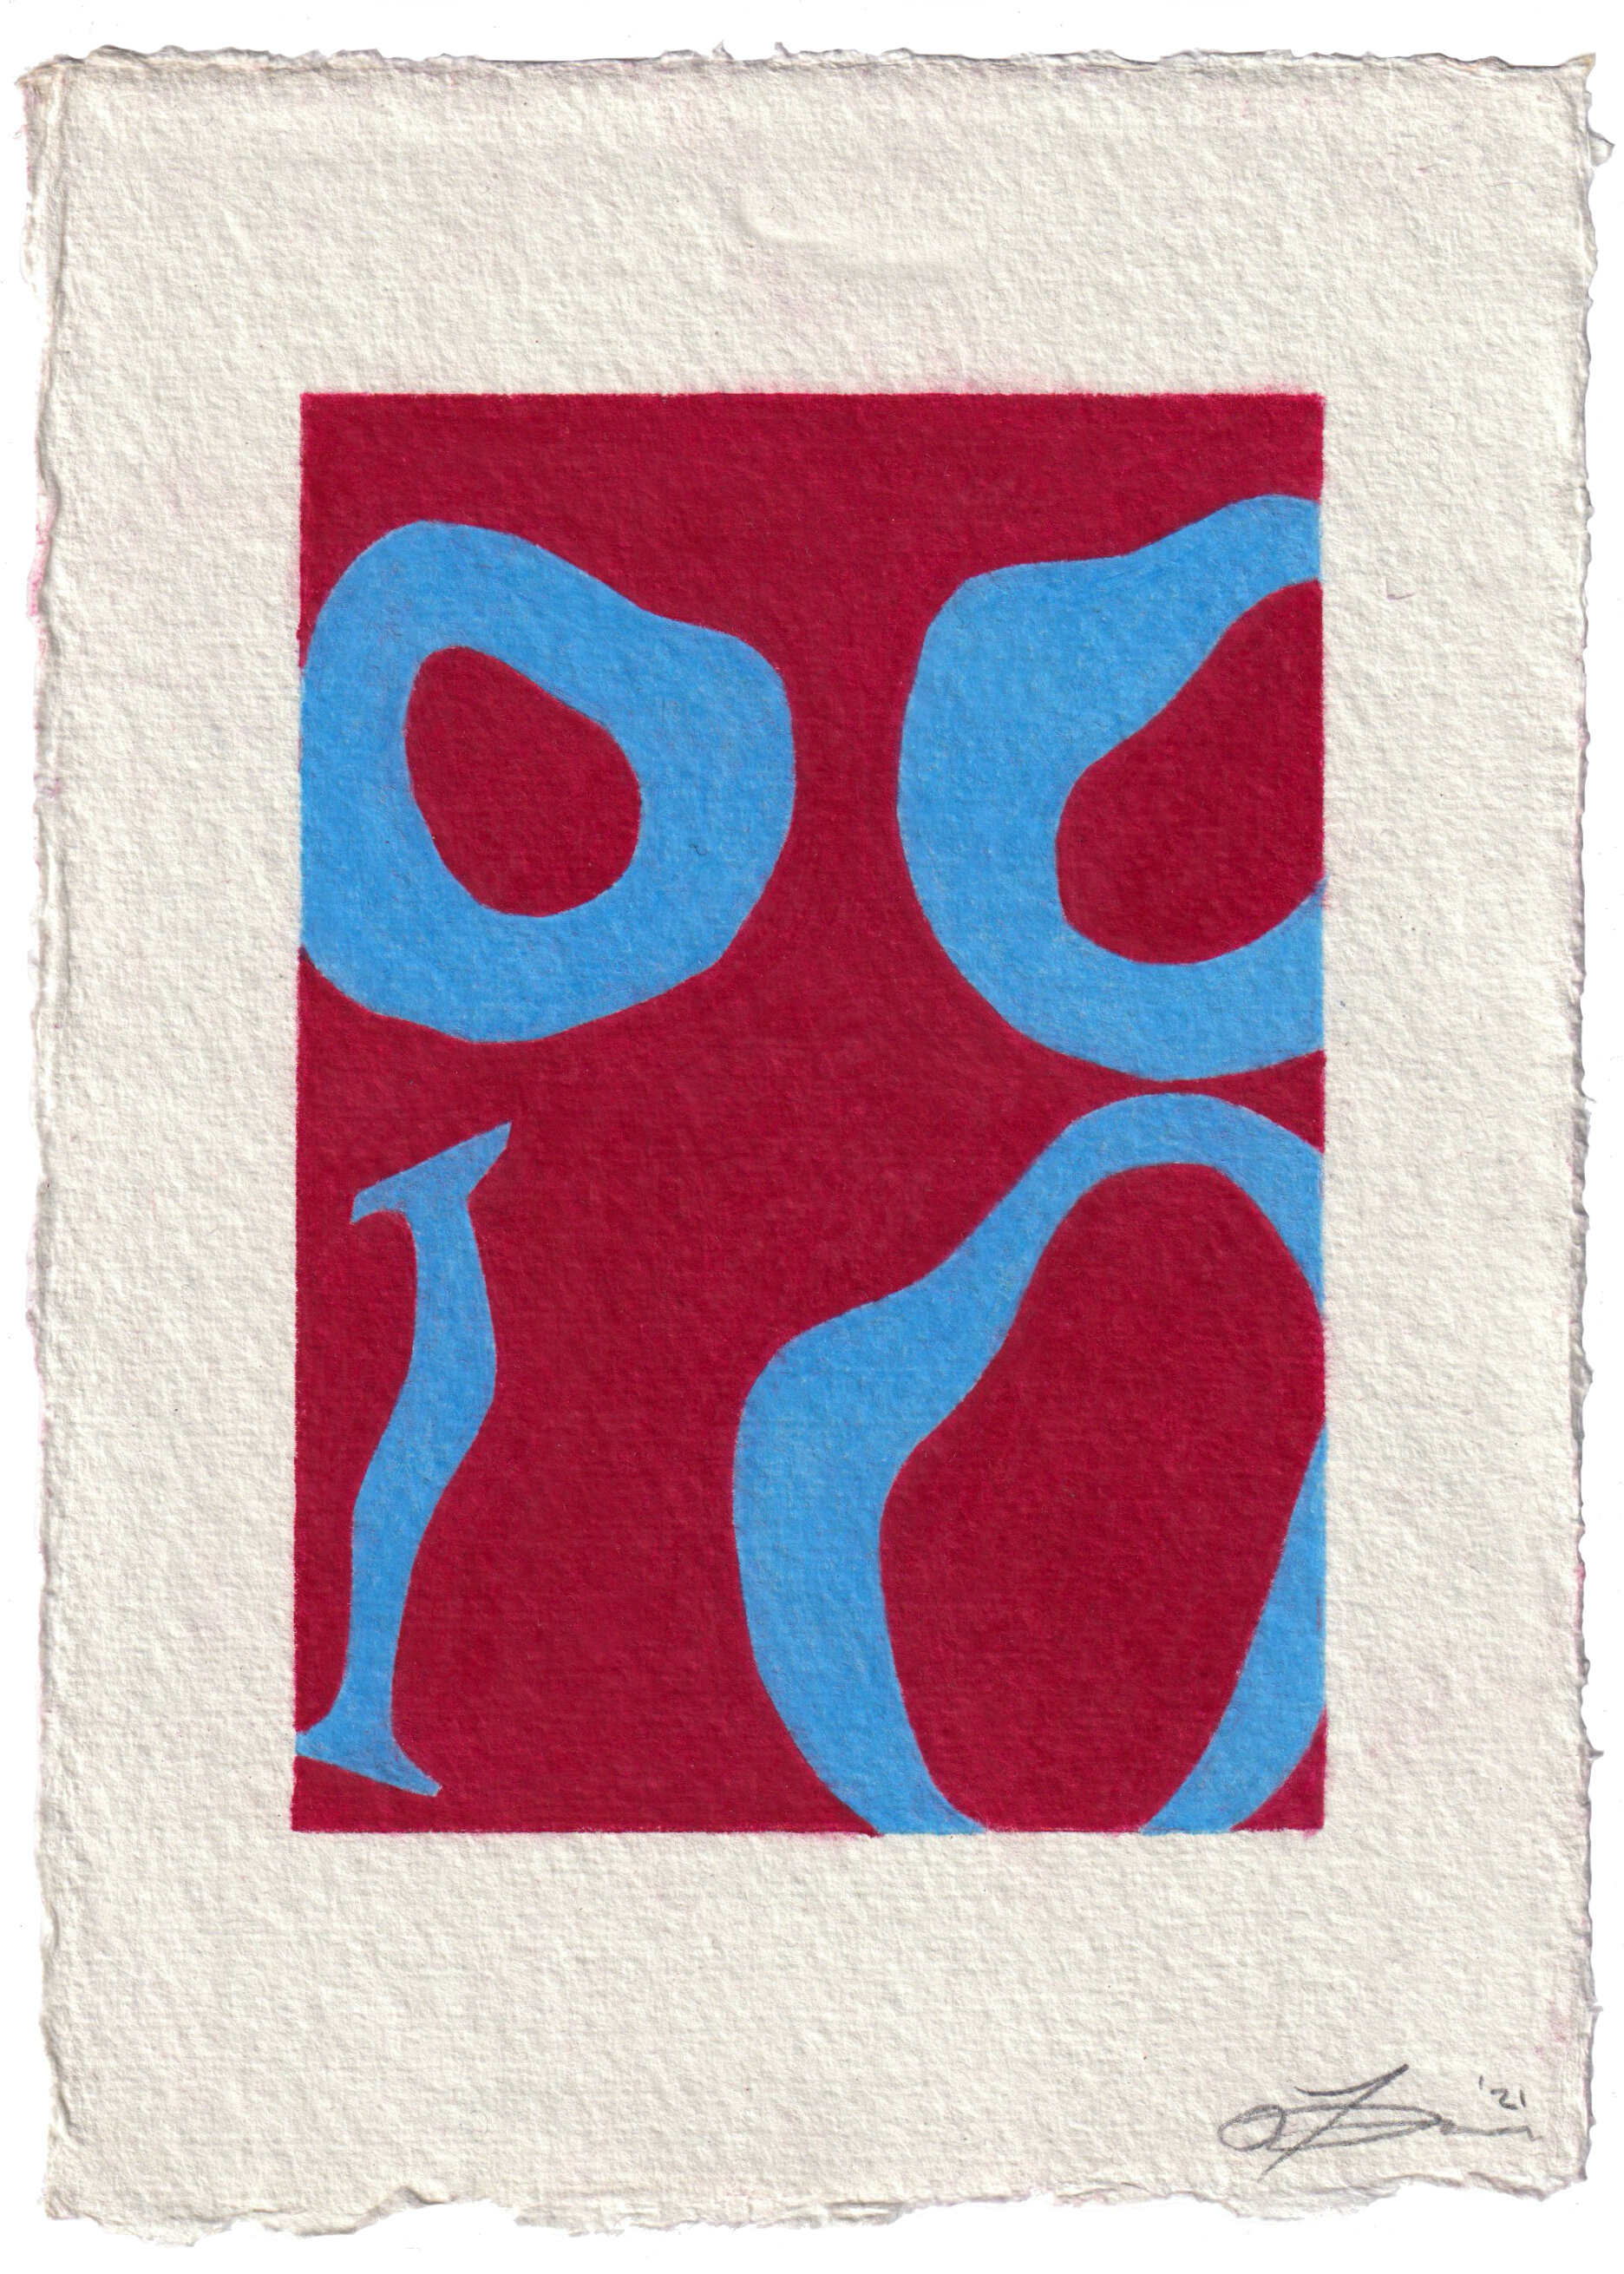 Untitled (Cerulean & Red)